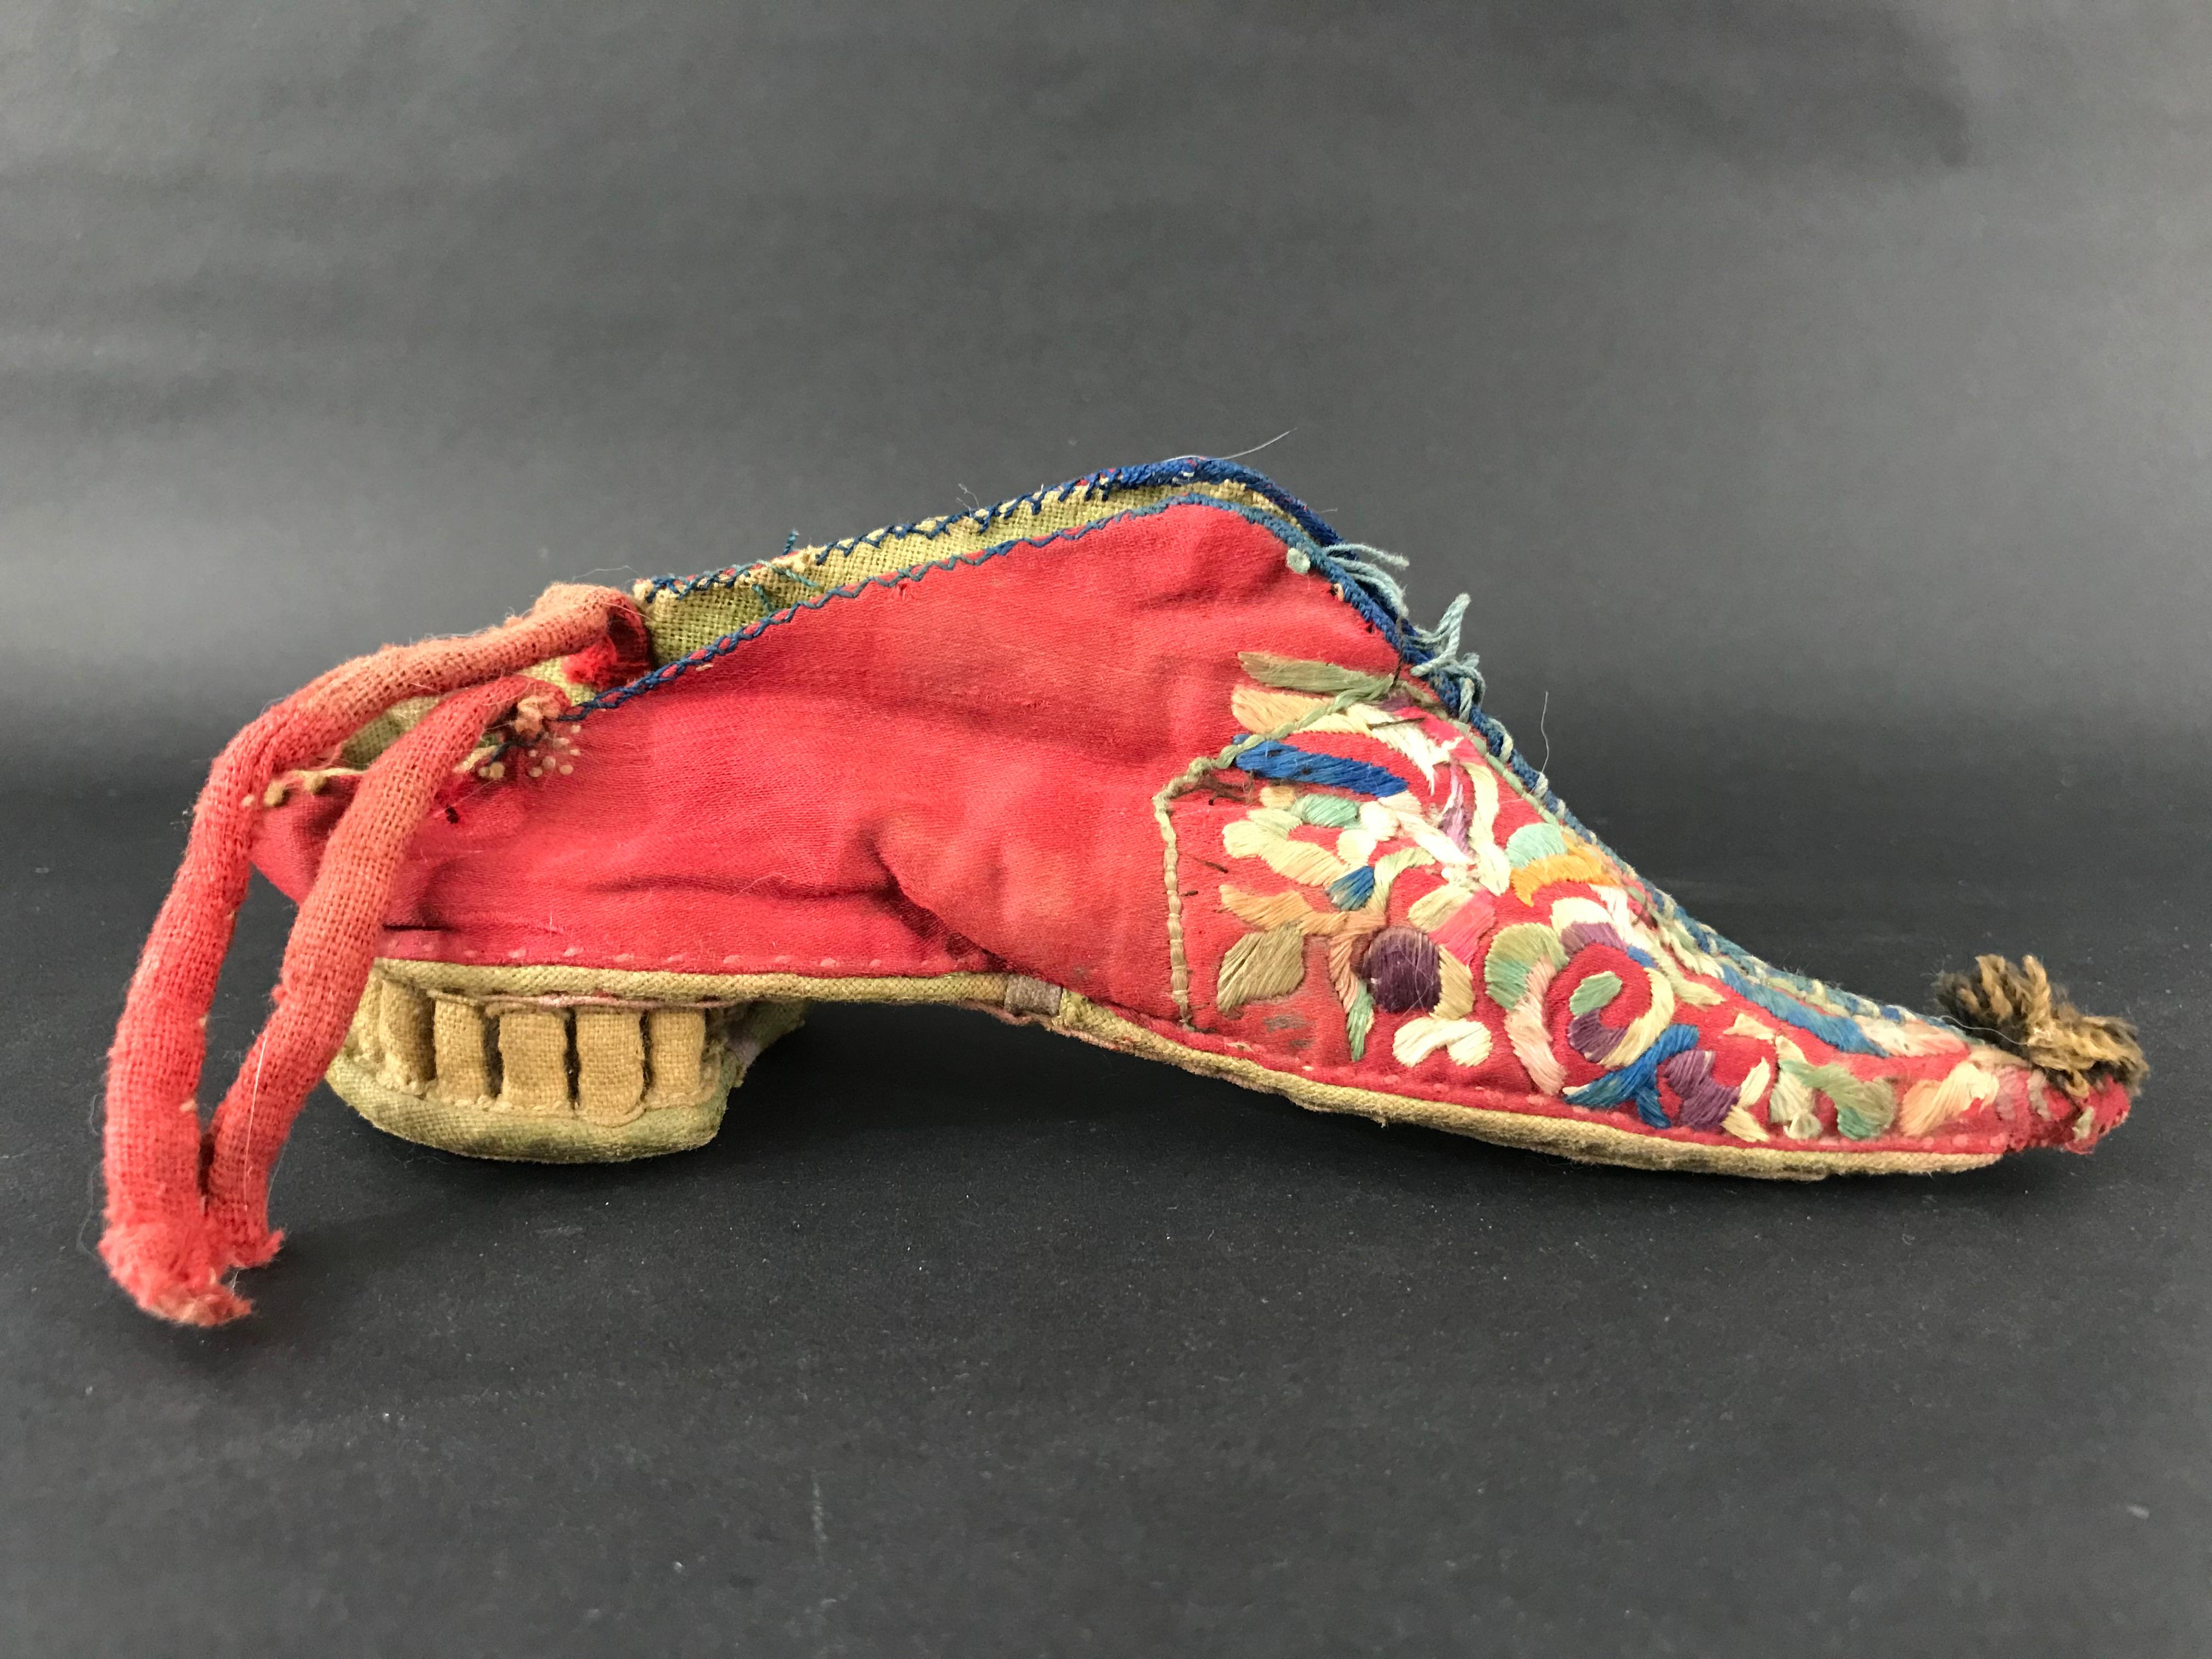 Late 19th Century Woman's Footwear with Bandaged Feet China, circa 1900